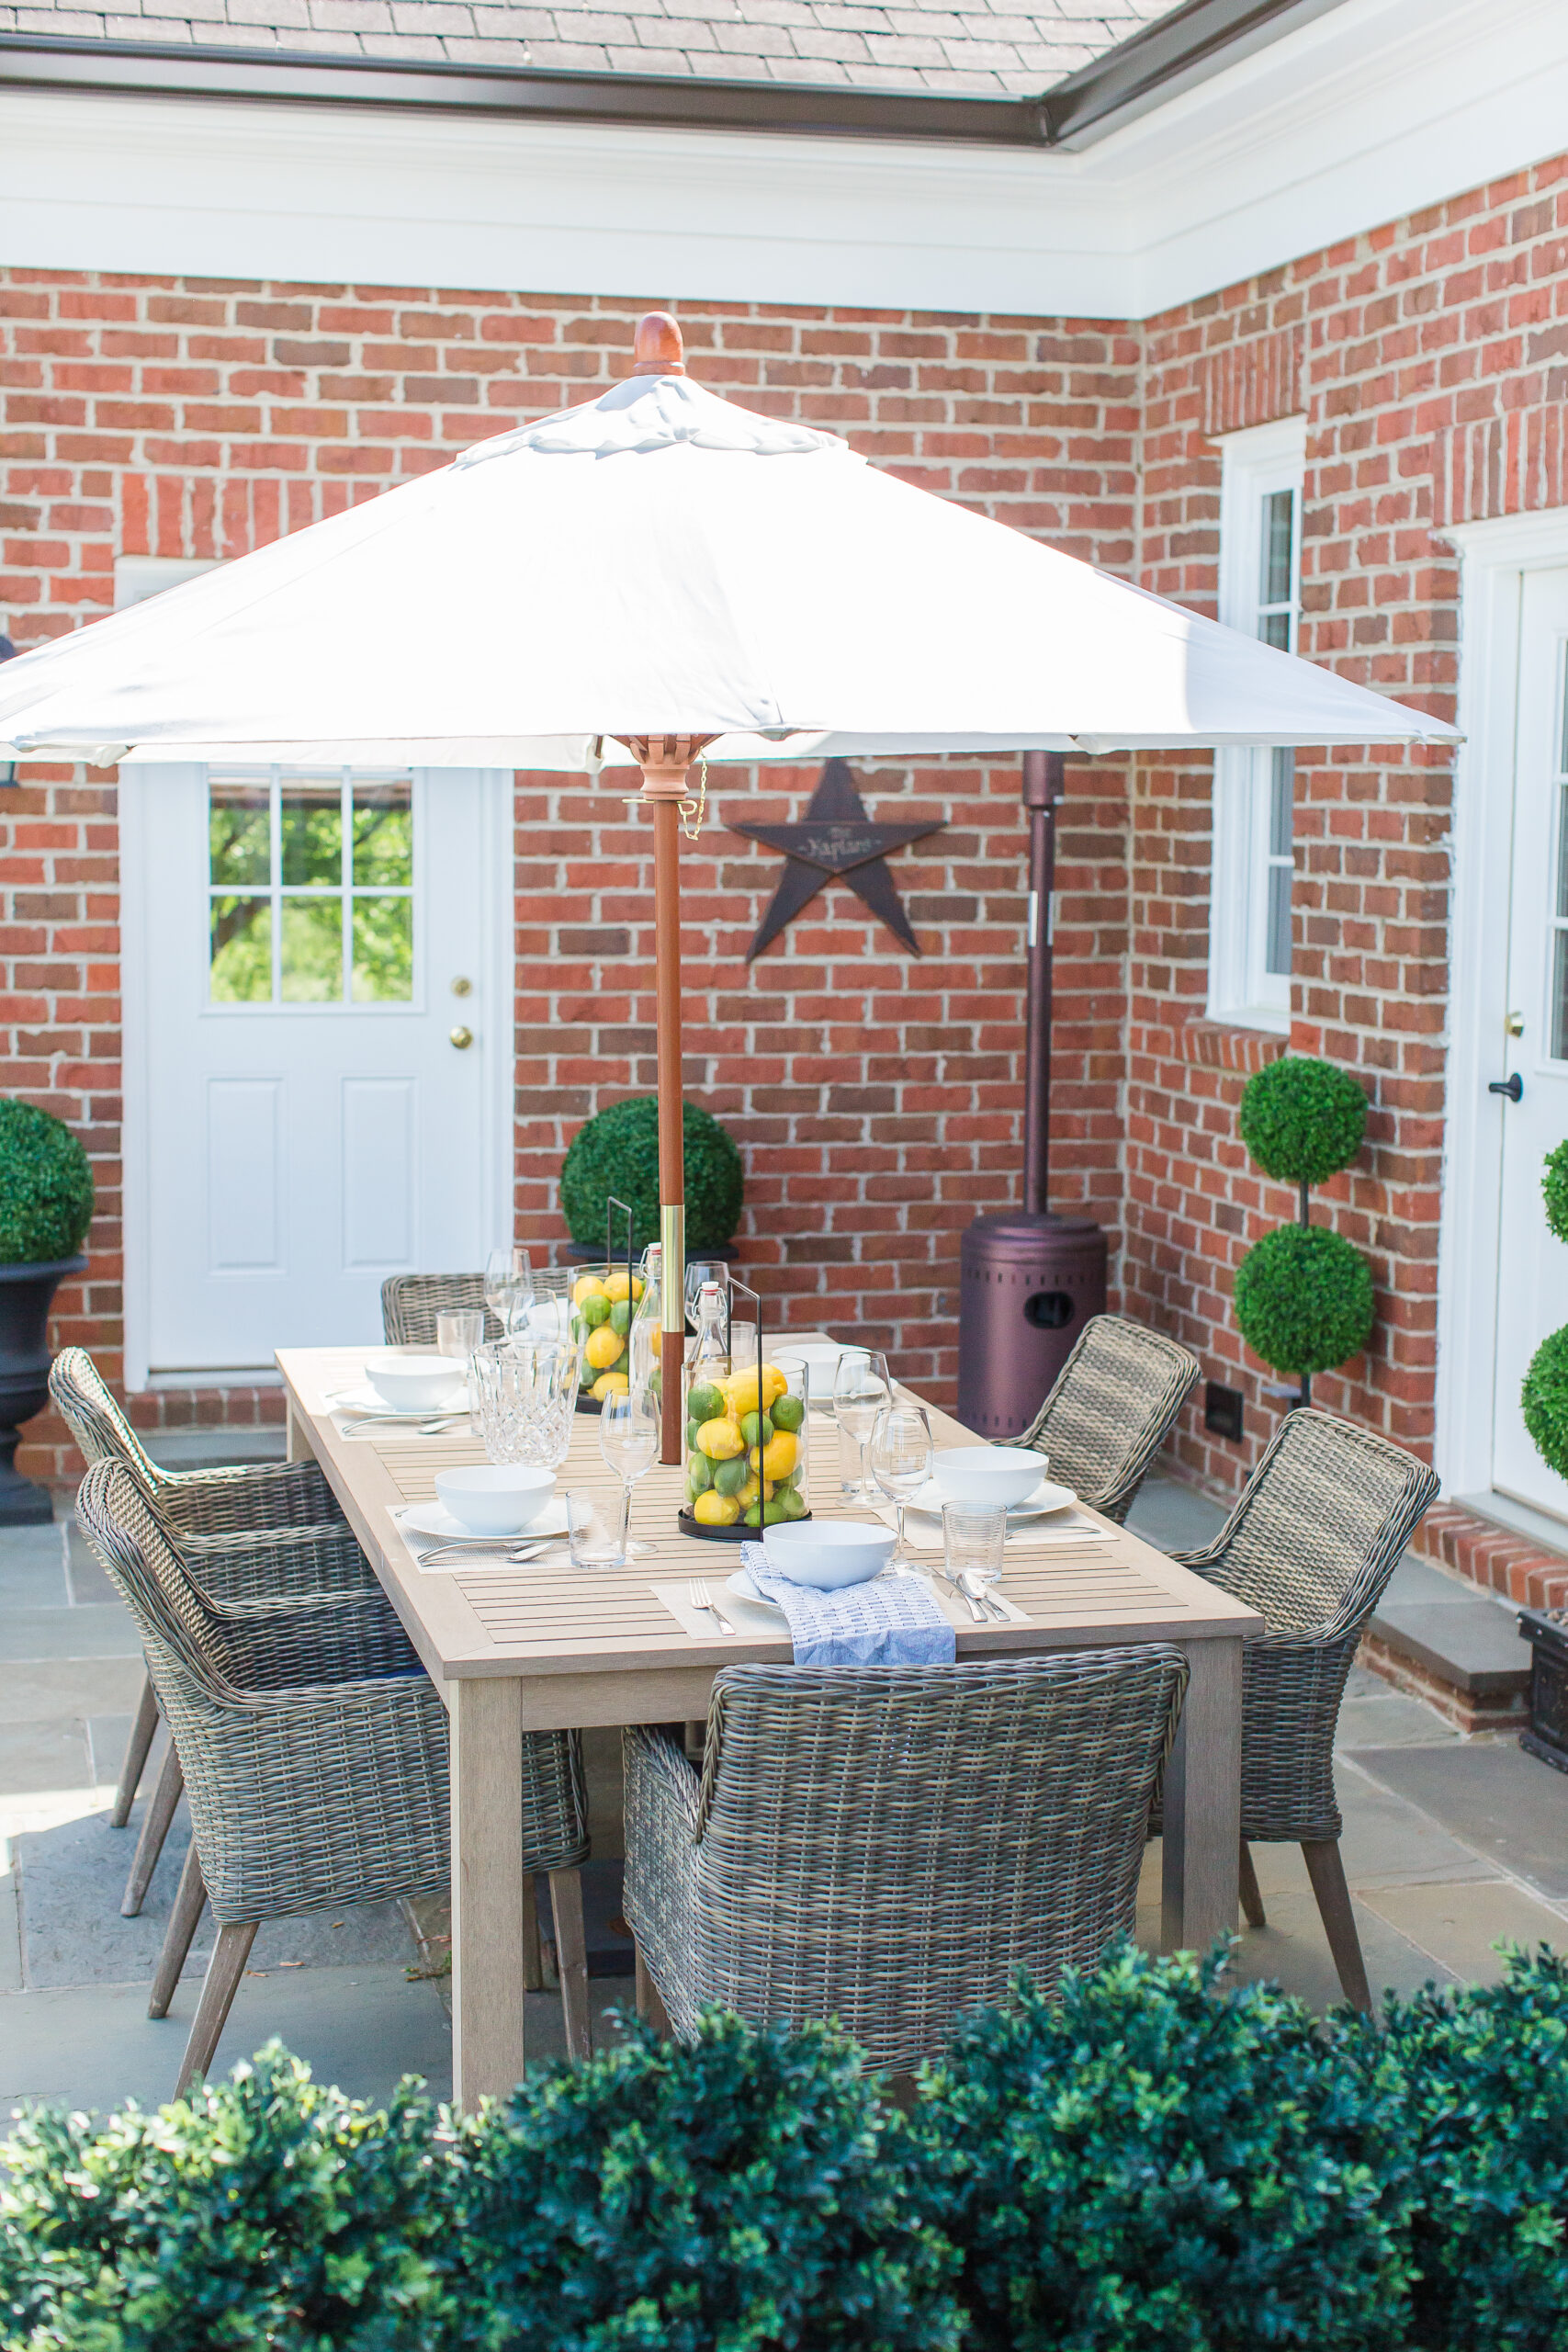 outdoor patio dining table styling with a patio umbrella, wicker patio chairs, artificial lemons and limes decorated in candle lanterns